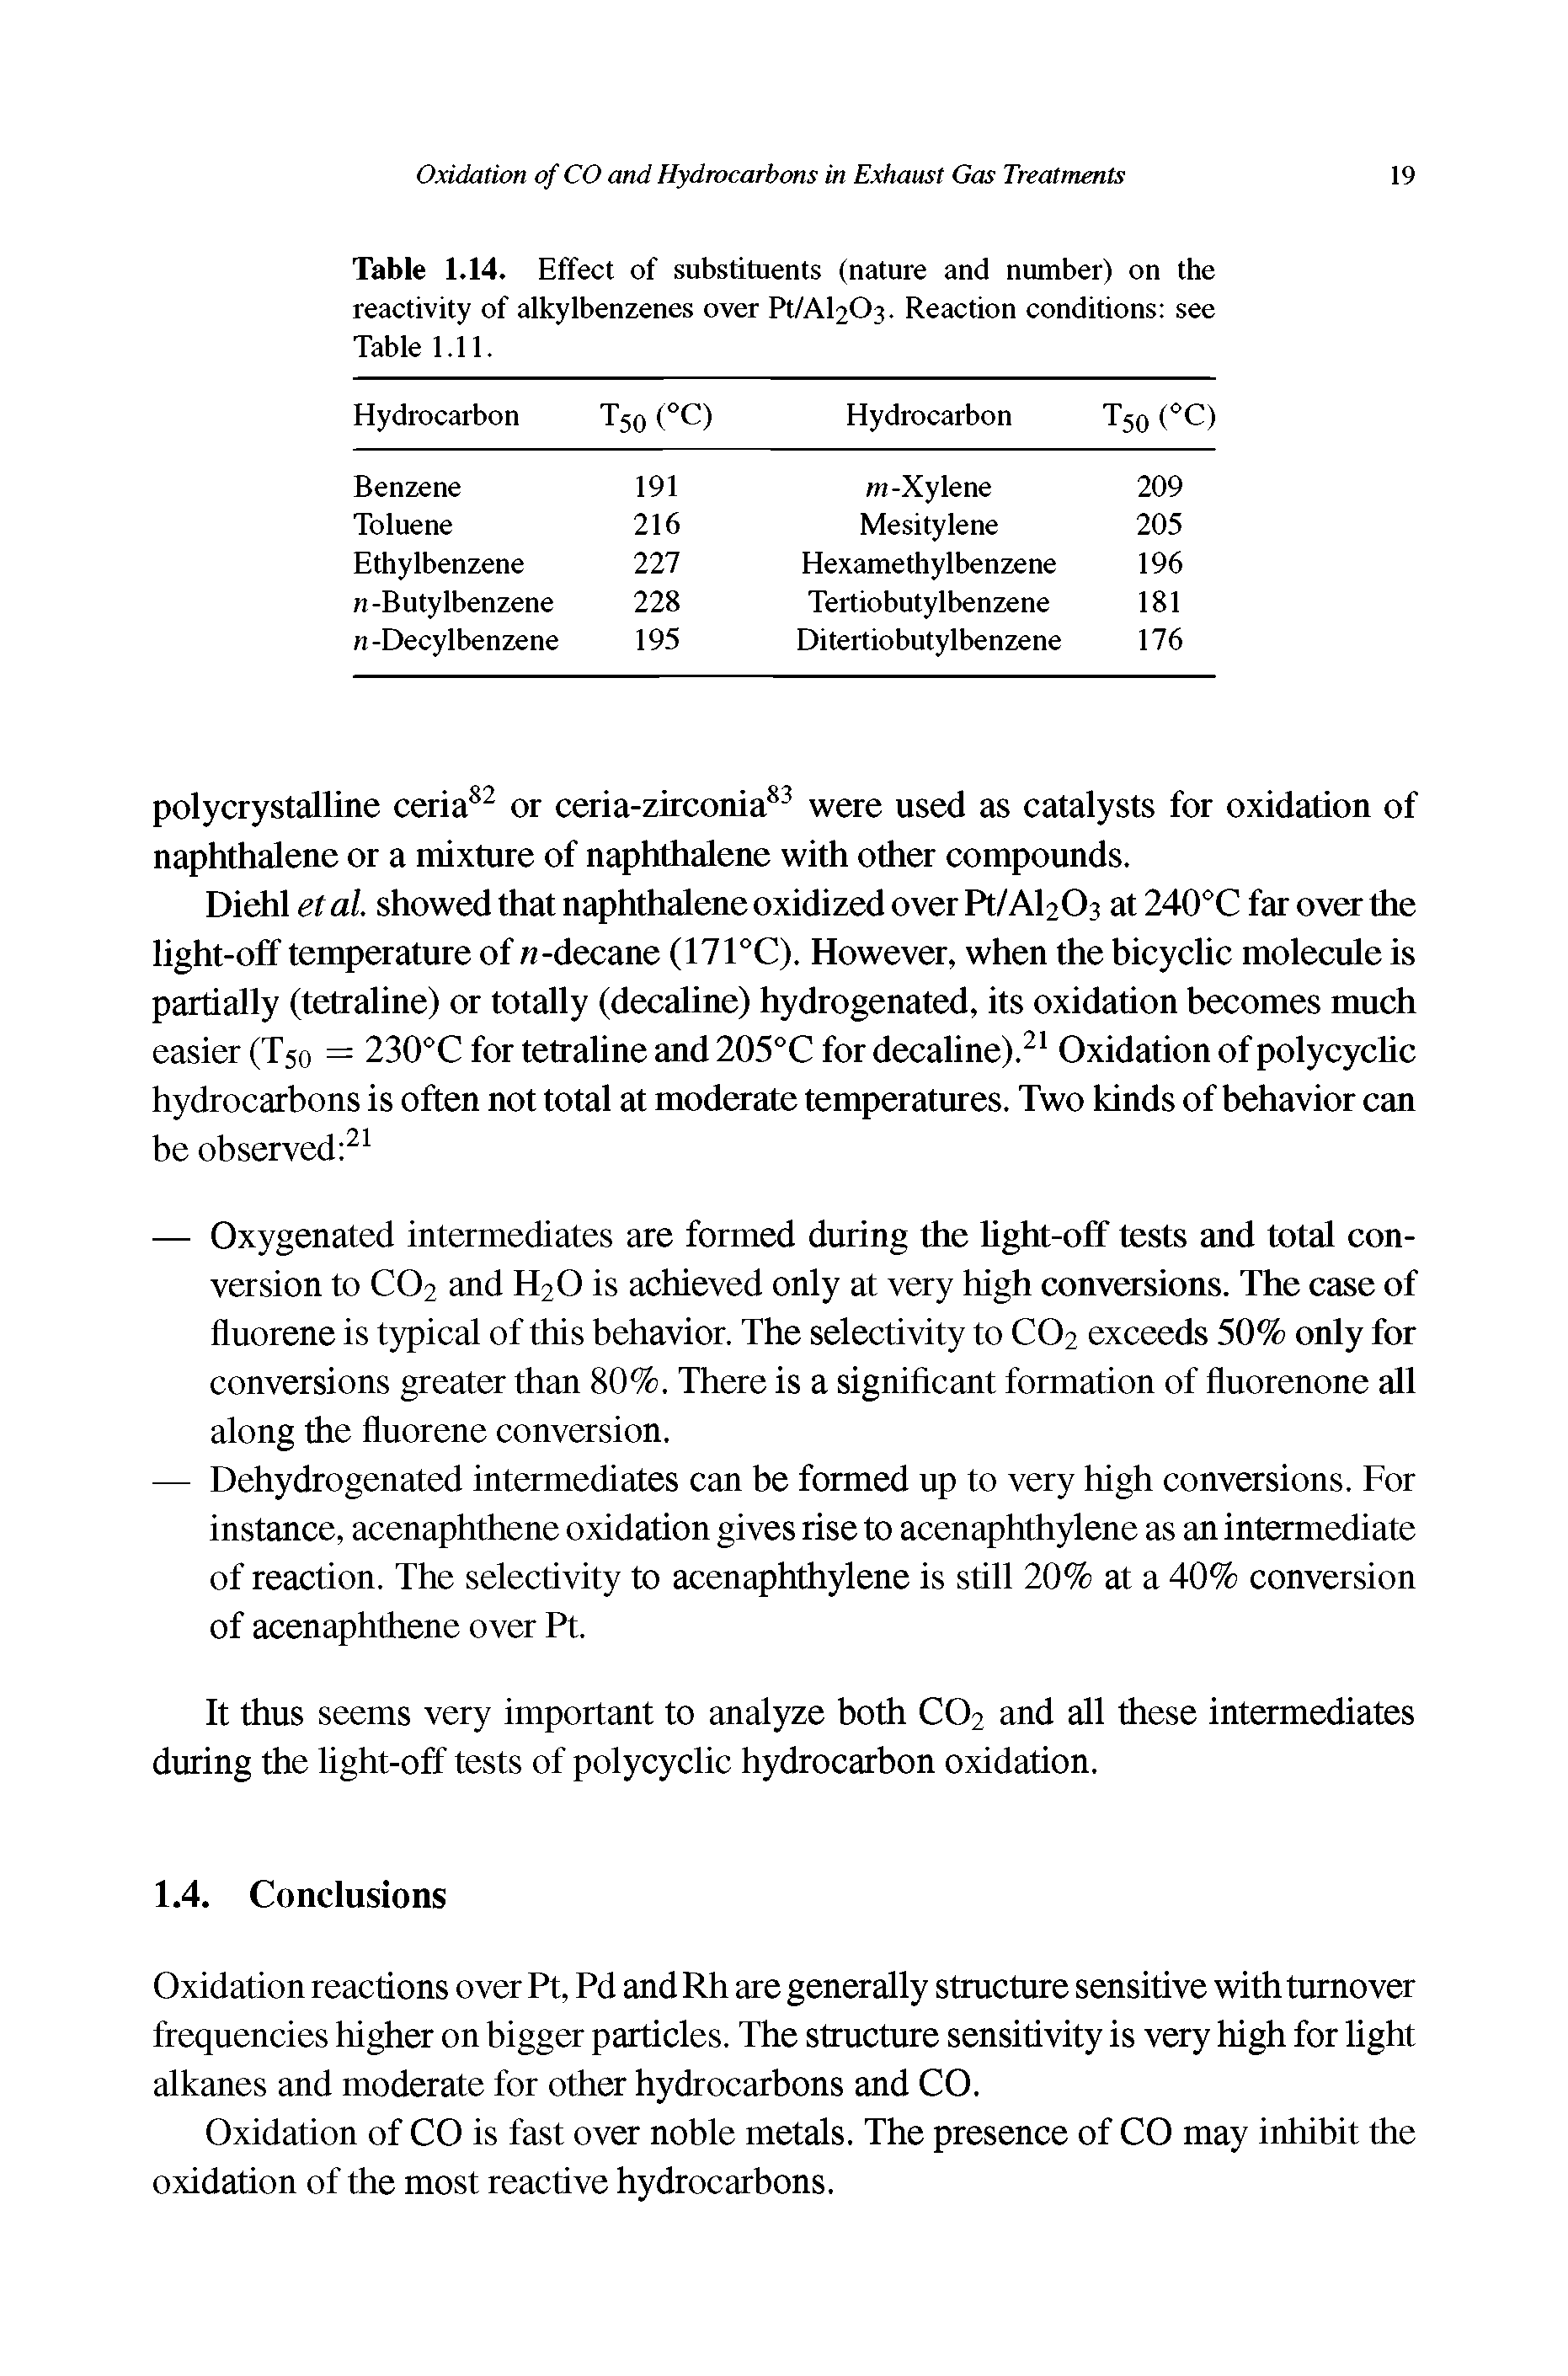 Table 1.14. Effect of substituents (nature and number) on the reactivity of alkylbenzenes over Pt/Al203. Reaction conditions see Table 1.11.